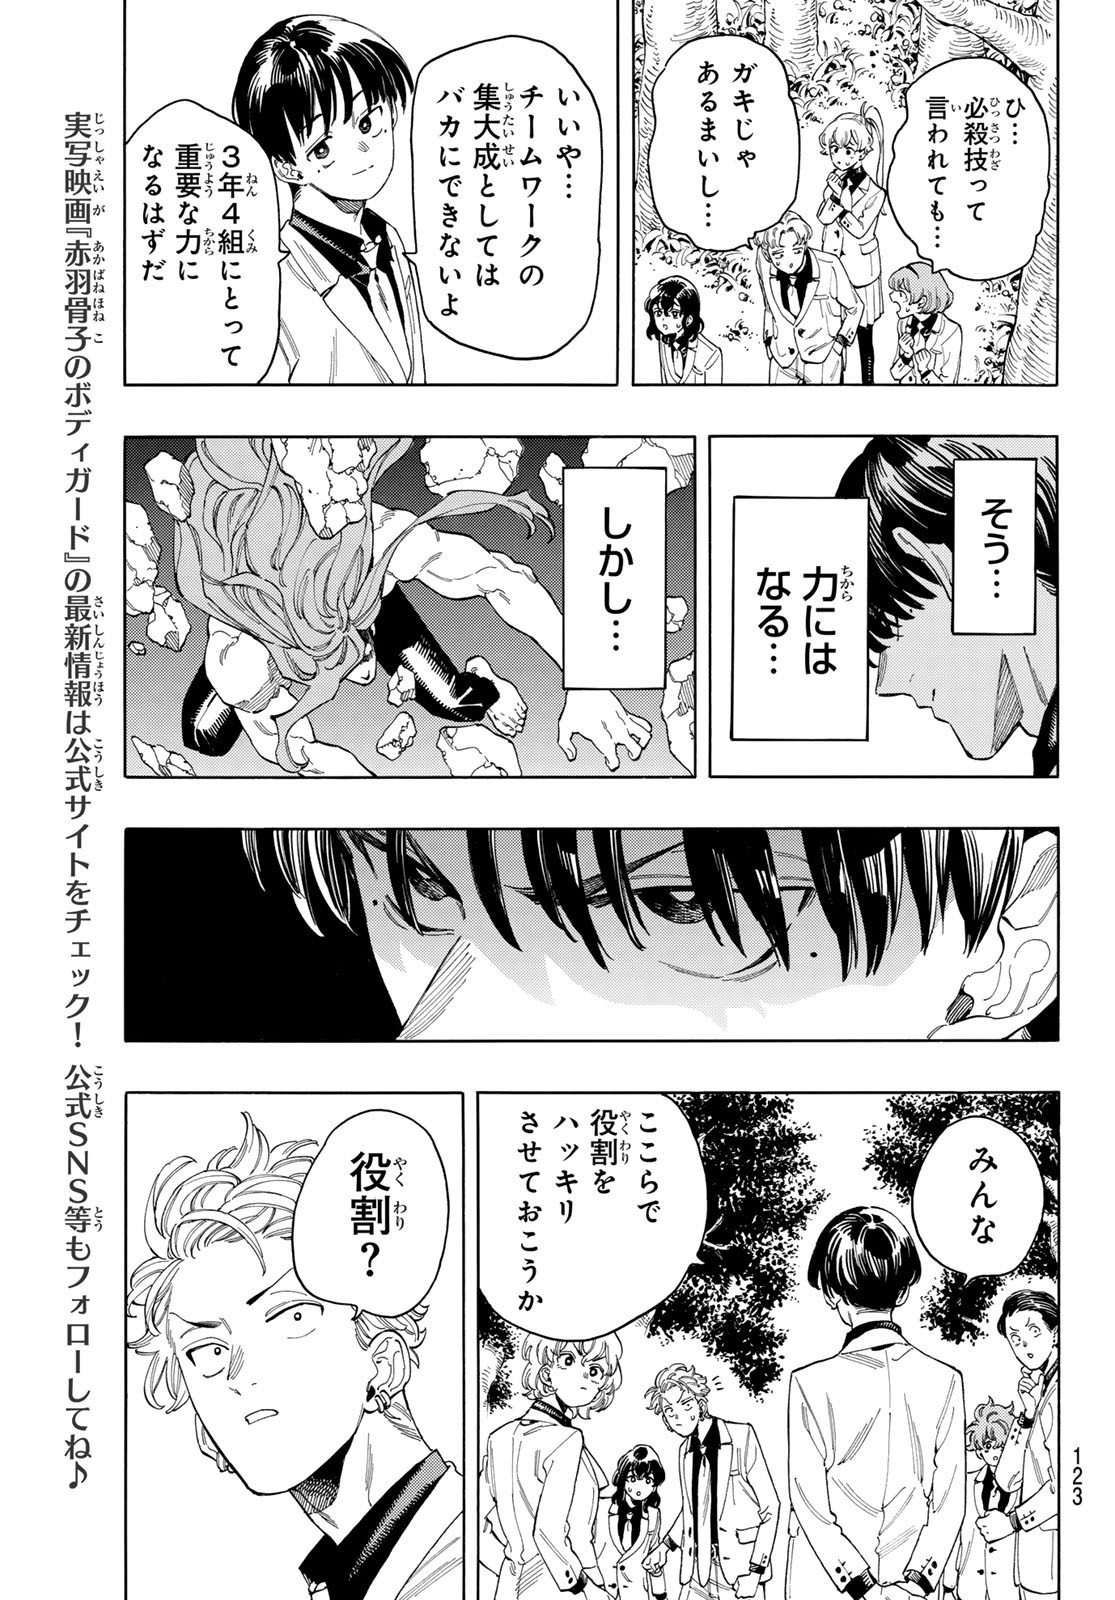 Weekly Shōnen Magazine - 週刊少年マガジン - Chapter 2024-33 - Page 121